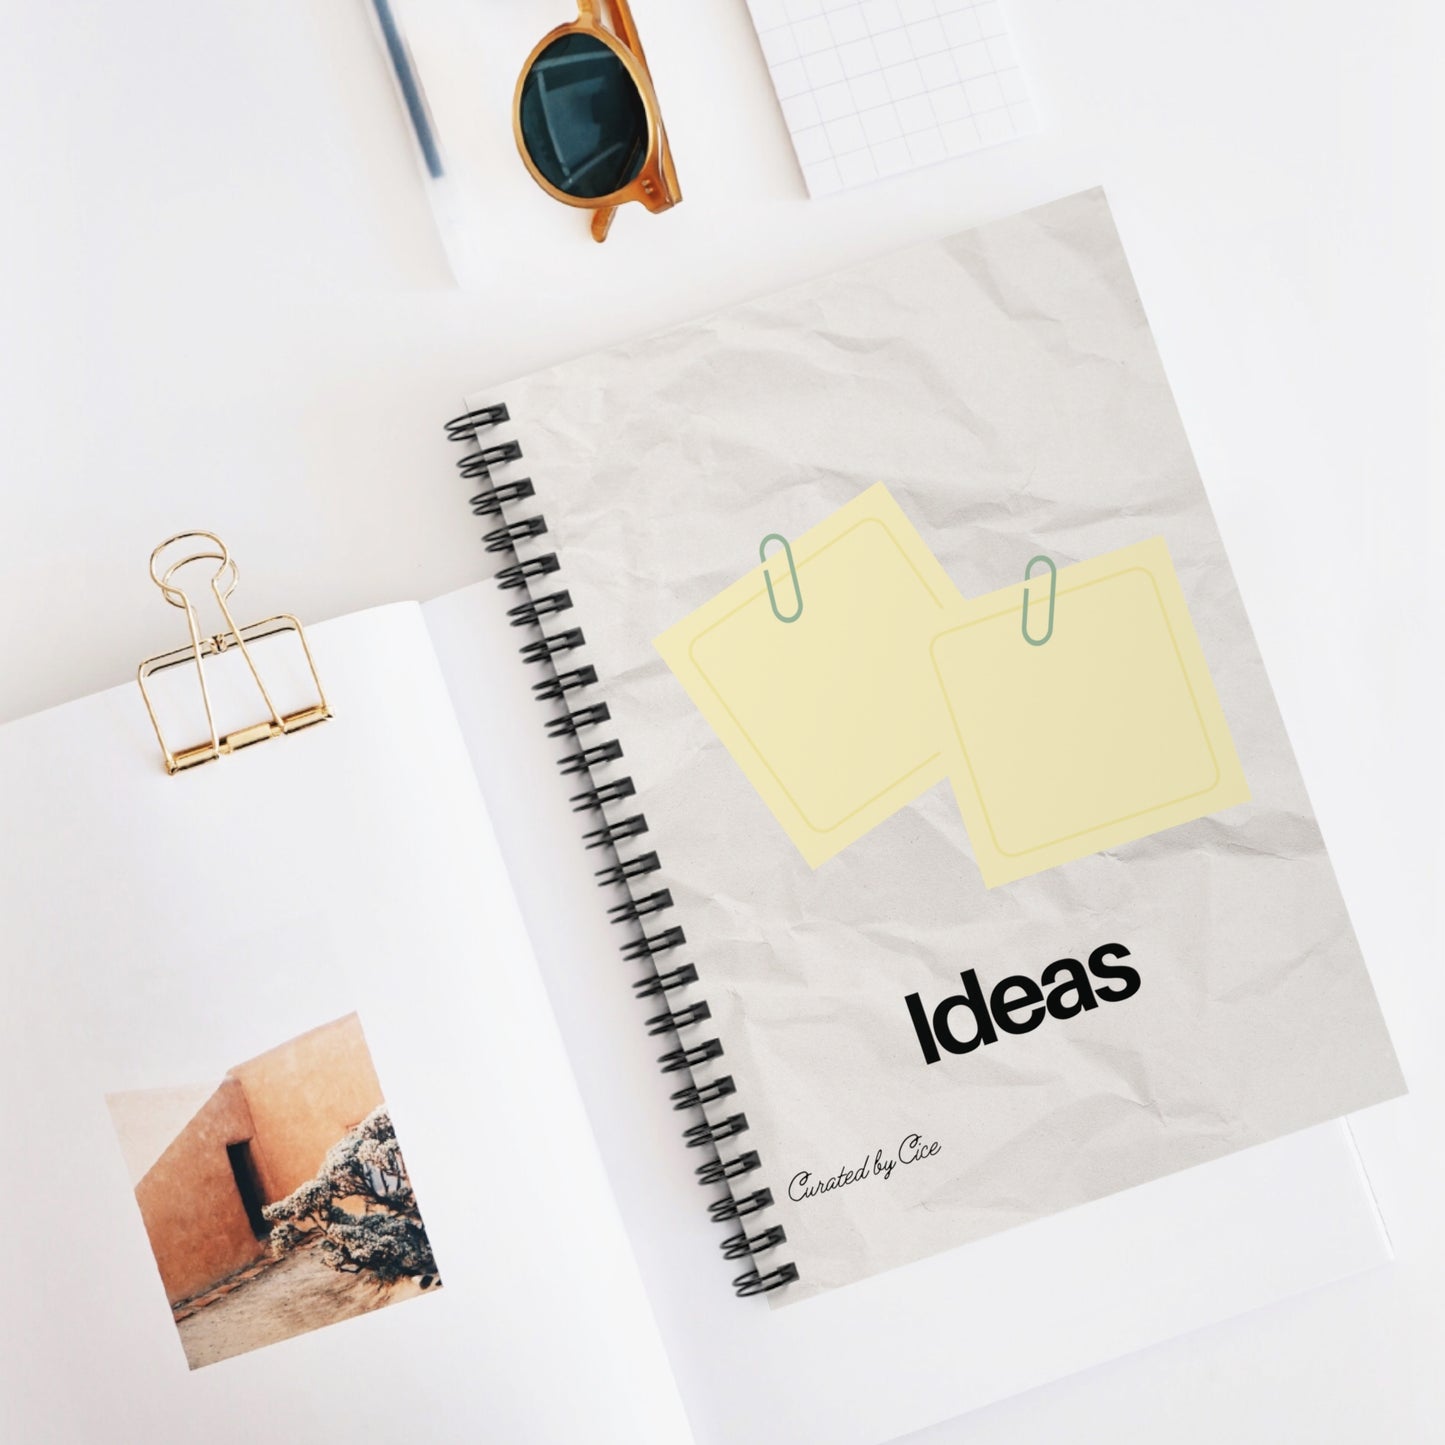 Posted Ideas Journal & Notebook